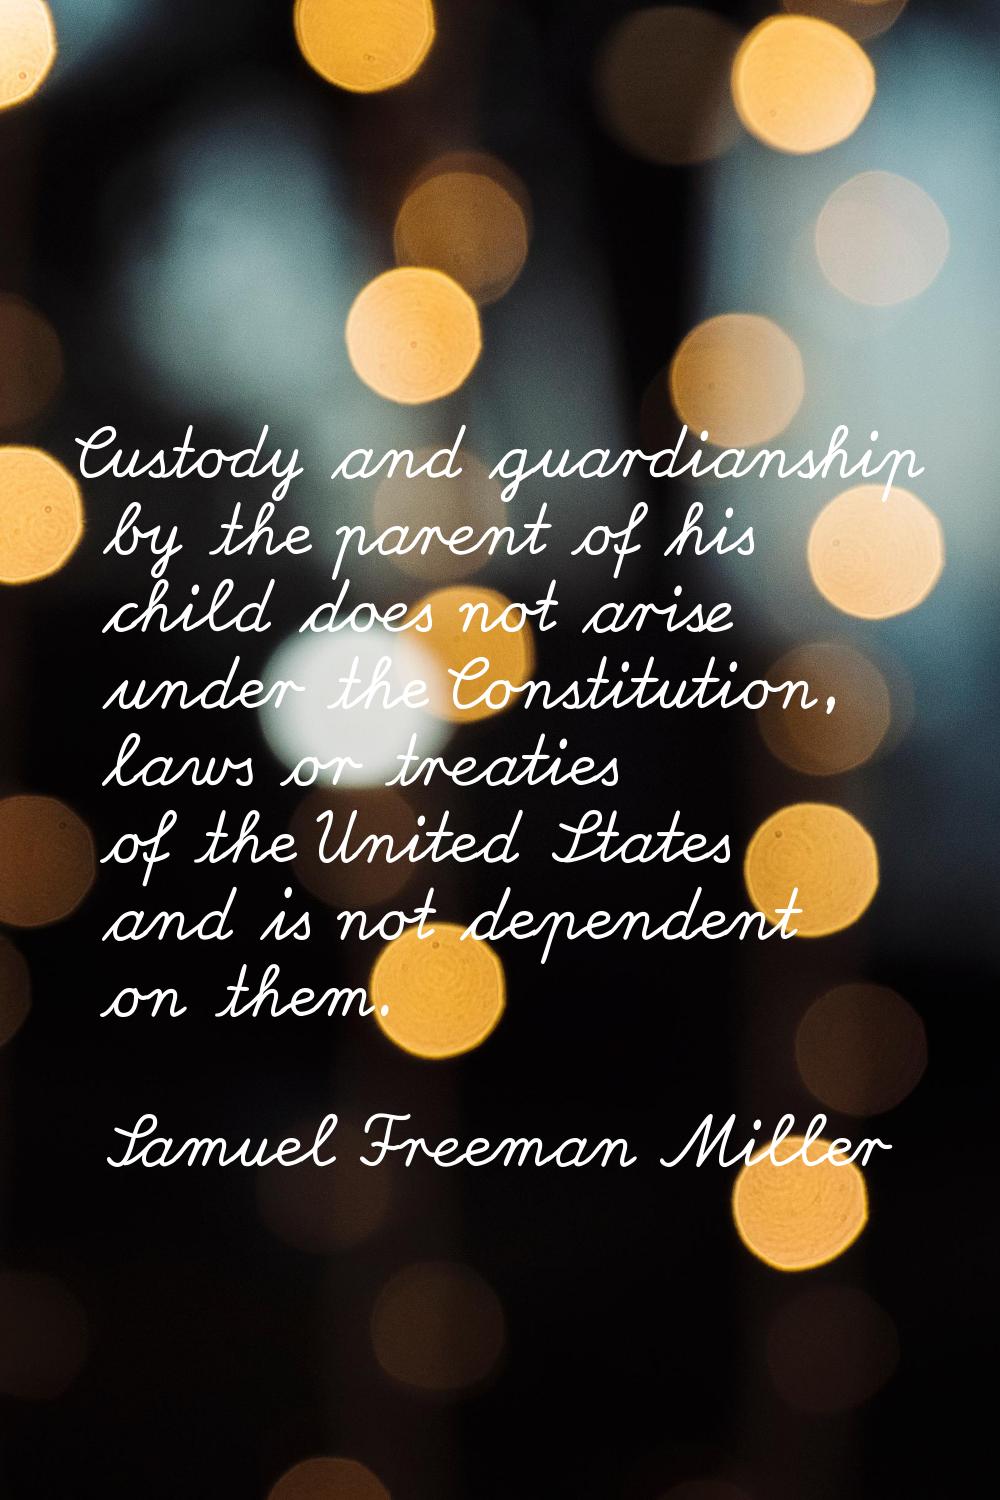 Custody and guardianship by the parent of his child does not arise under the Constitution, laws or 